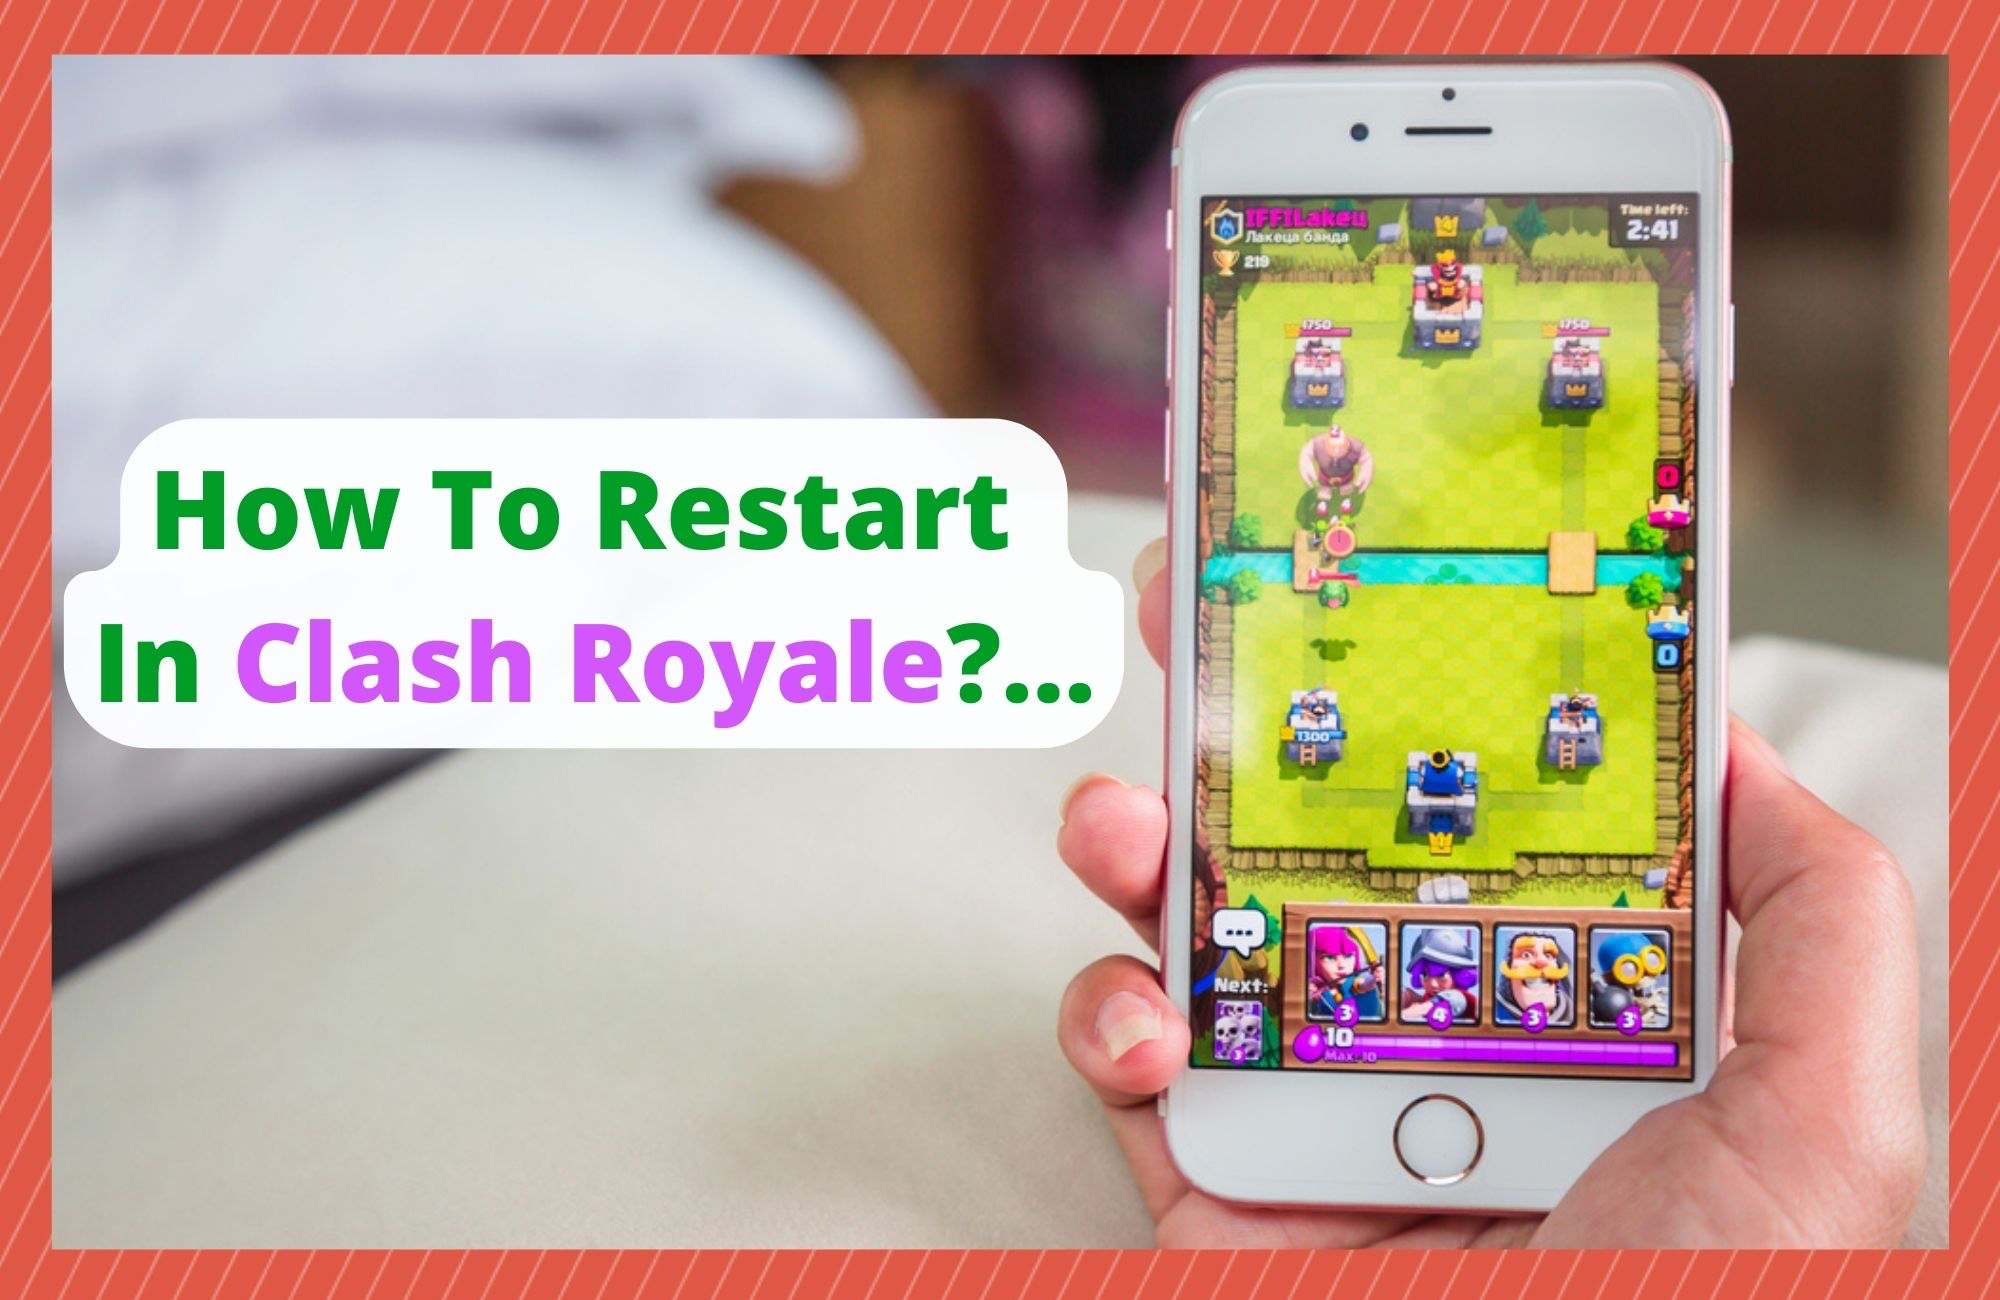 How To Restart In Clash Royale